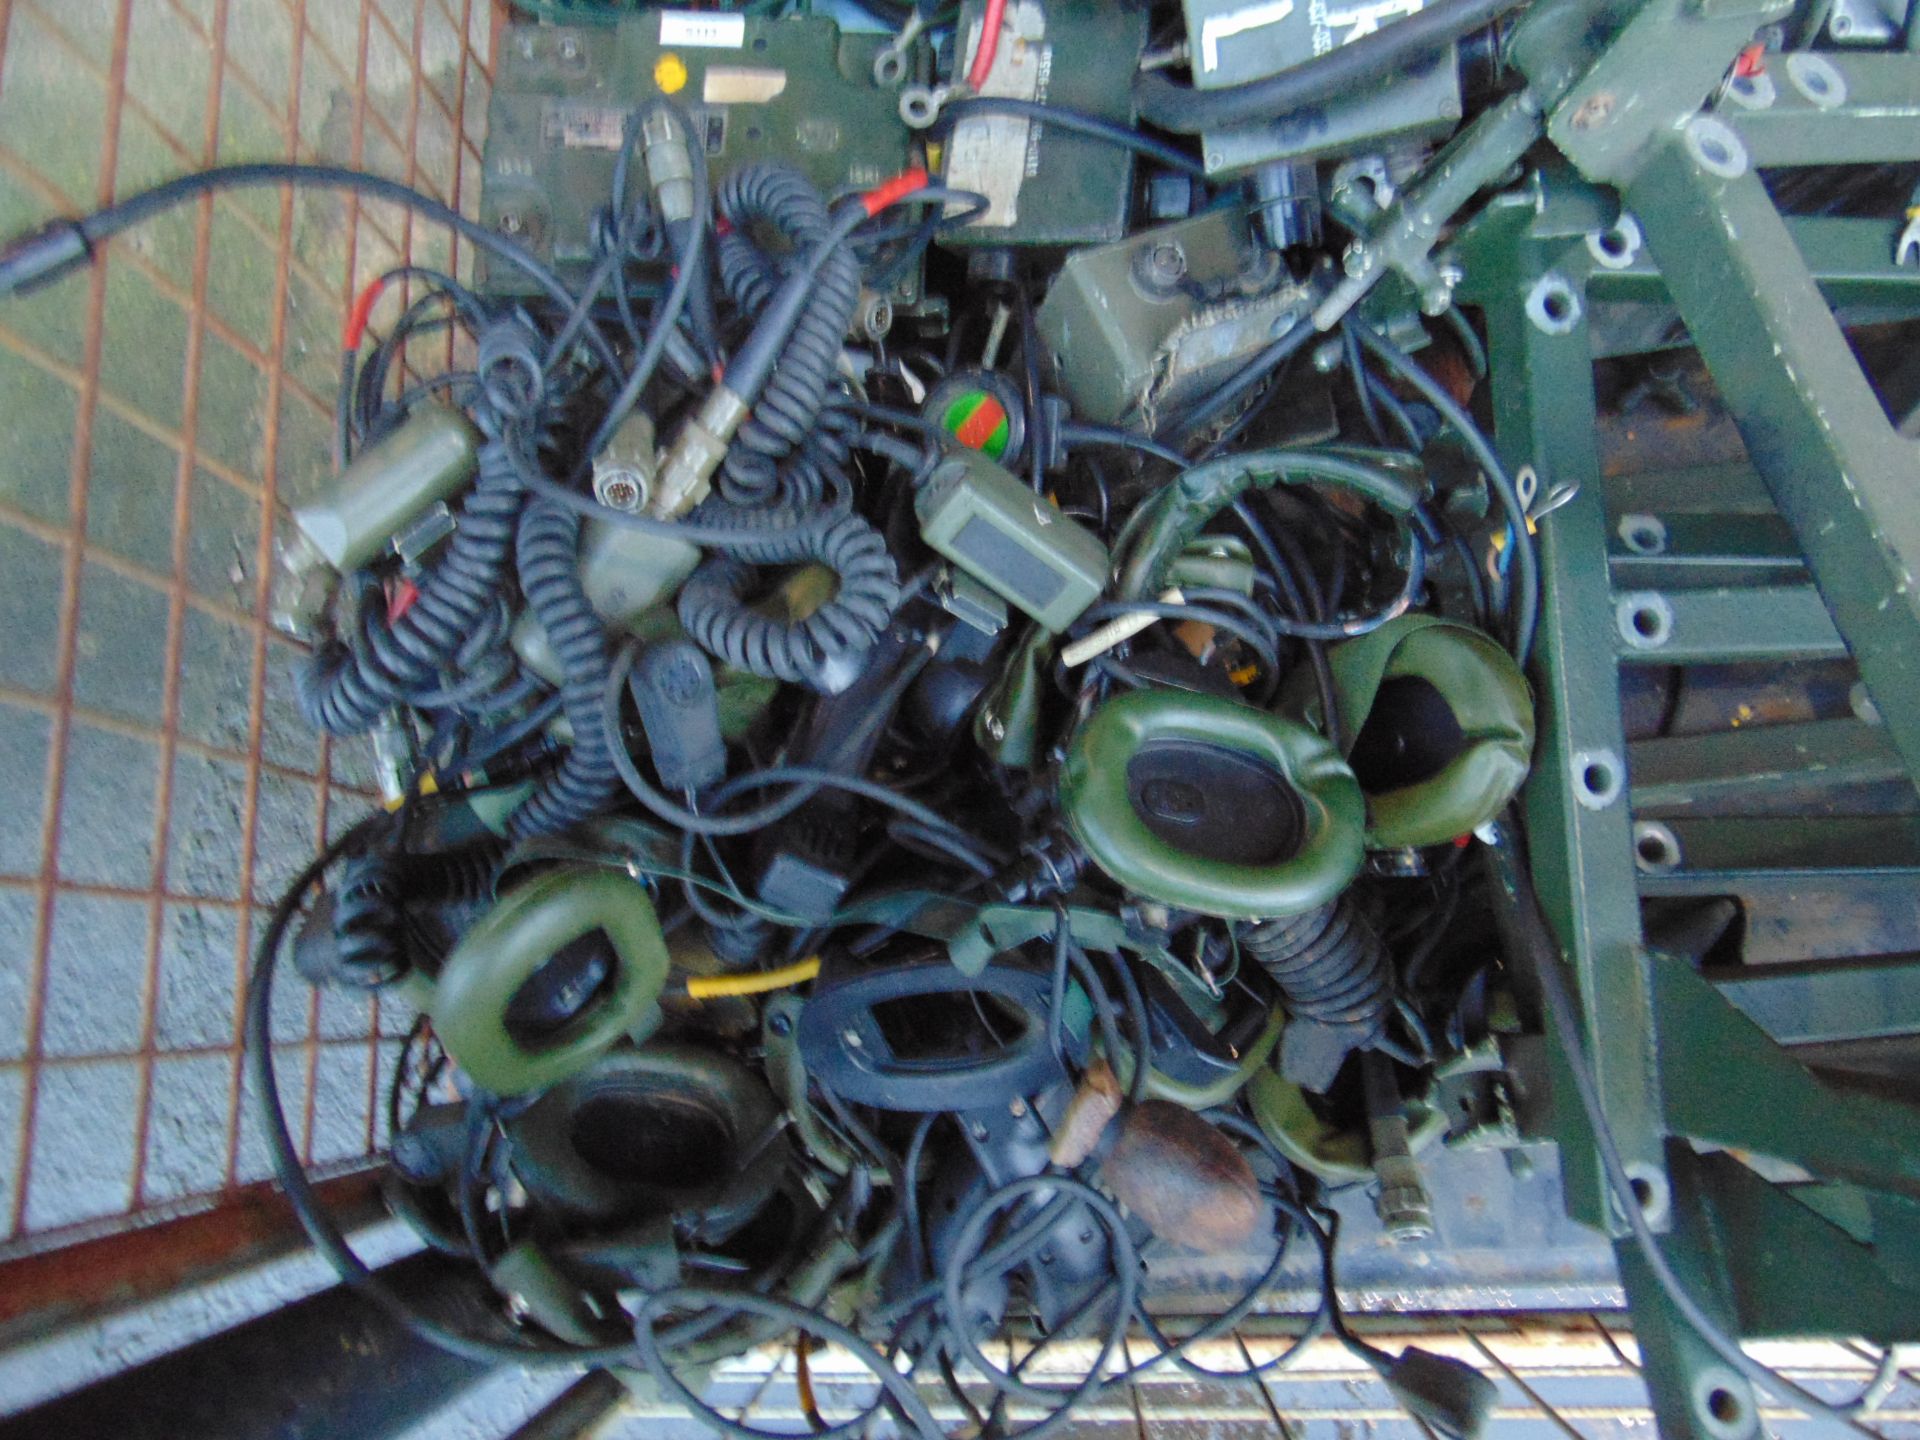 Stillage of Clansman Radio Equipment inc Headsets, Cable Antenna kits Ect - Image 4 of 7